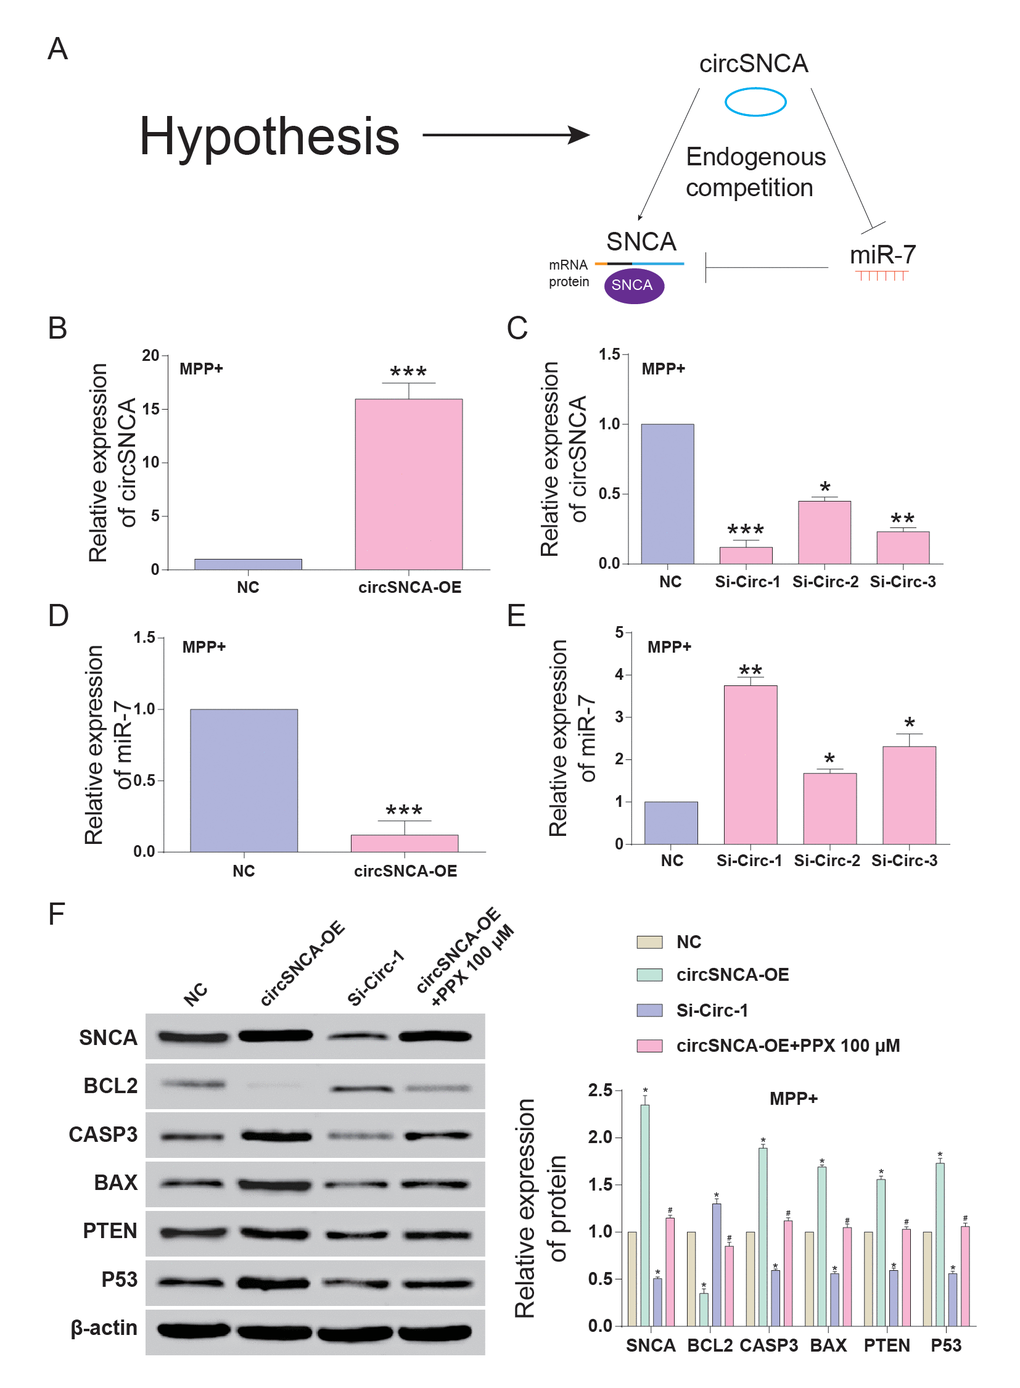 CircSNCA increased SNCA expression by downregulating miR-7 and influenced the expression of apoptosis-related genes. (A) Endogenous competition between circSNCA and SNCA mRNA for miR-7 binding. (B) The relative expression of circSNCA detected by qRT-PCR increased after overexpression (circSNCA-OE) in the MPP+ group. *P C) The relative expression of circSNCA detected by qRT-PCR decreased after circSNCA knockdown in the MPP+ group. *P D) The relative expression of miR-7 detected by qRT-PCR decreased after circSNCA overexpression in the MPP+ group. *P E) The relative expression of miR-7 detected by qRT-PCR increased after circSNCA knockdown in the MPP+ group. *P F) The protein expression of SNCA and pro-apoptotic genes (CASP3, BAX, PTEN and P53) detected by western blot increased in the circSNCA overexpression group, decreased in the circSNCA knockdown group, while that of the anti-apoptotic gene (BCL2) showed the opposite tendency. *P #P 